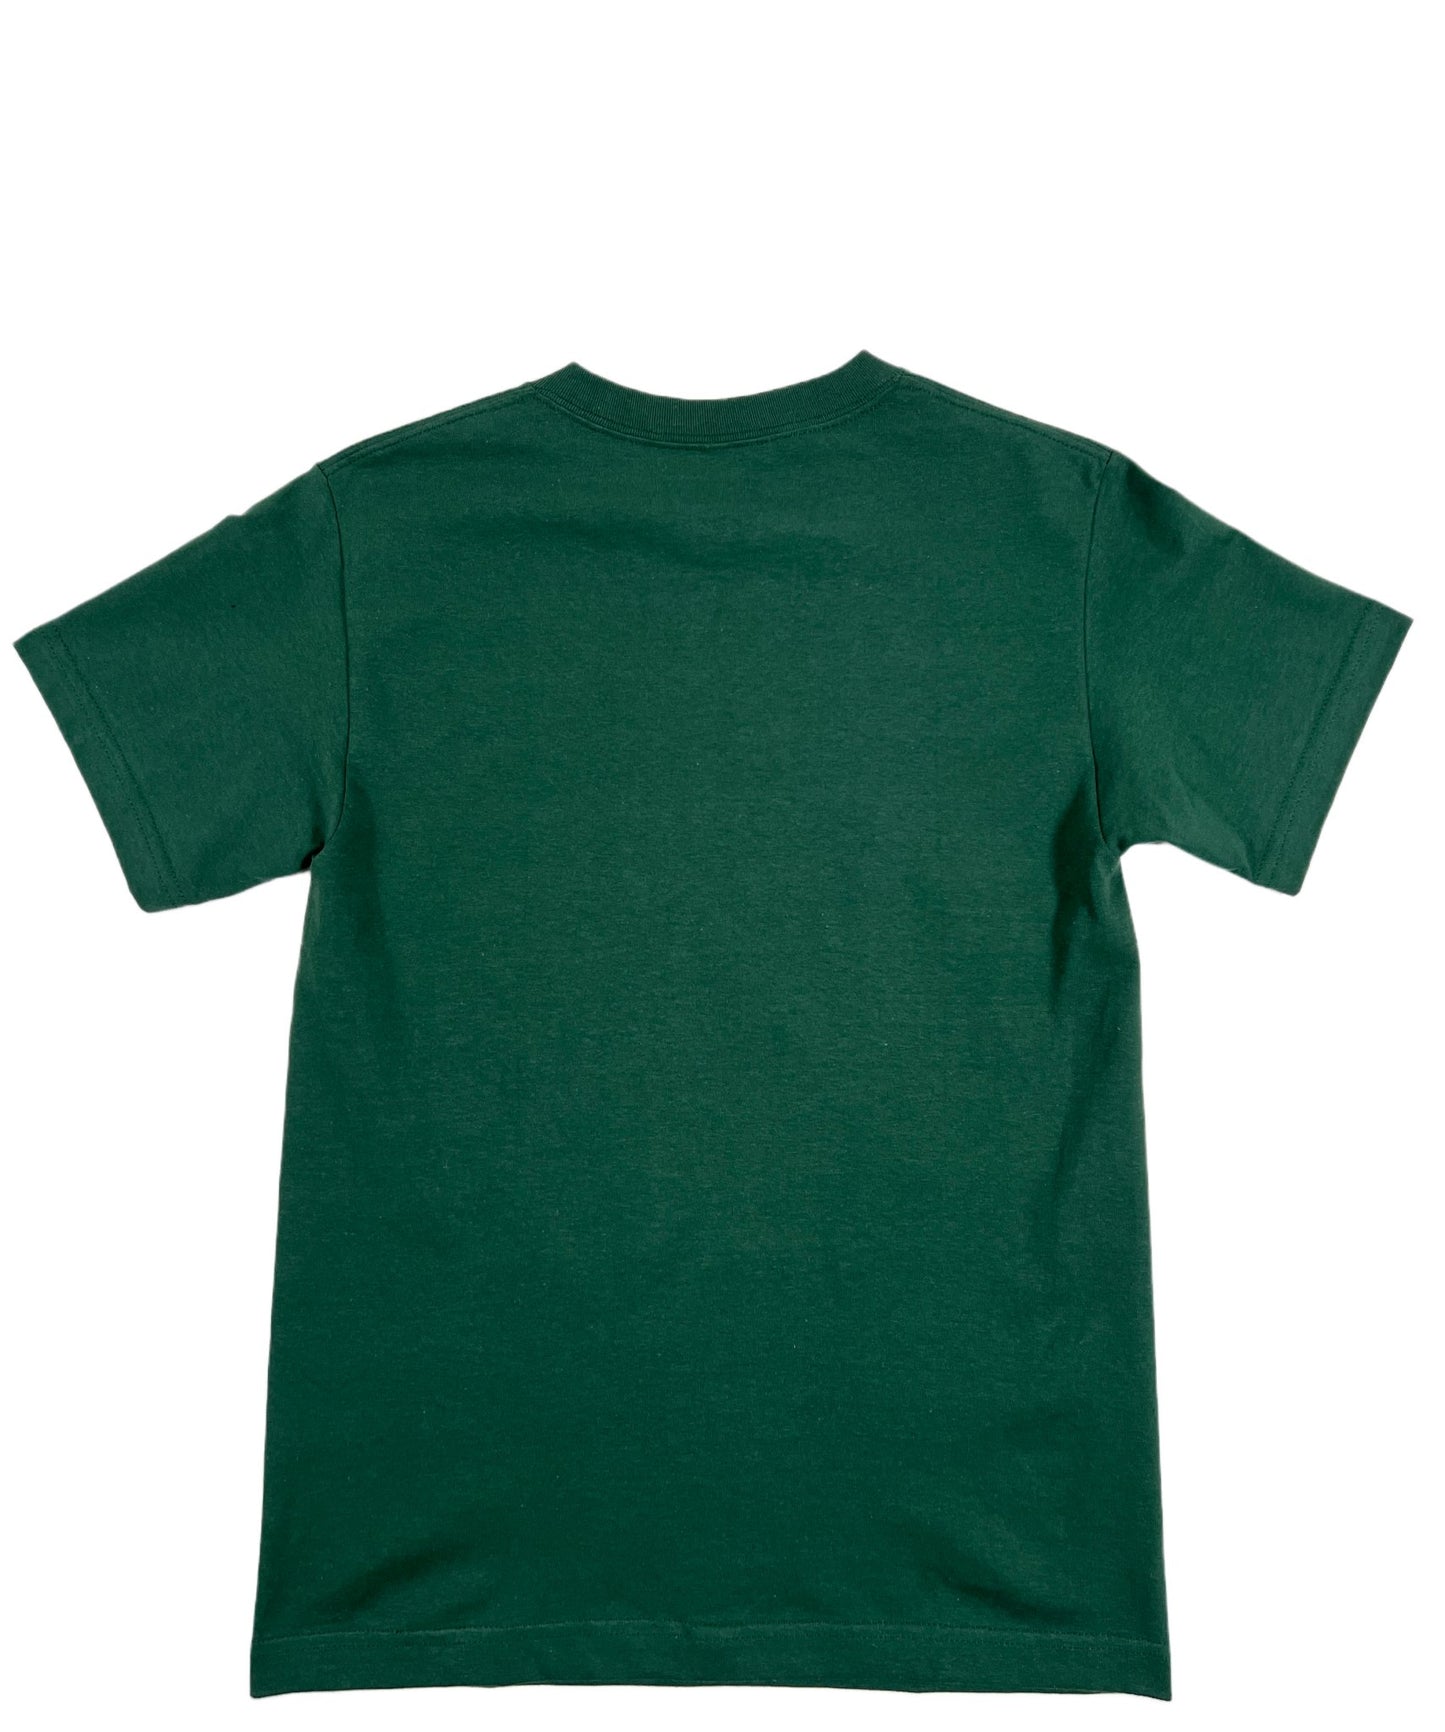 A green cotton graphic t-shirt with "PLEASURES YOUR TIME T-SHIRT GREEN" design on a white background by PLEASURES.